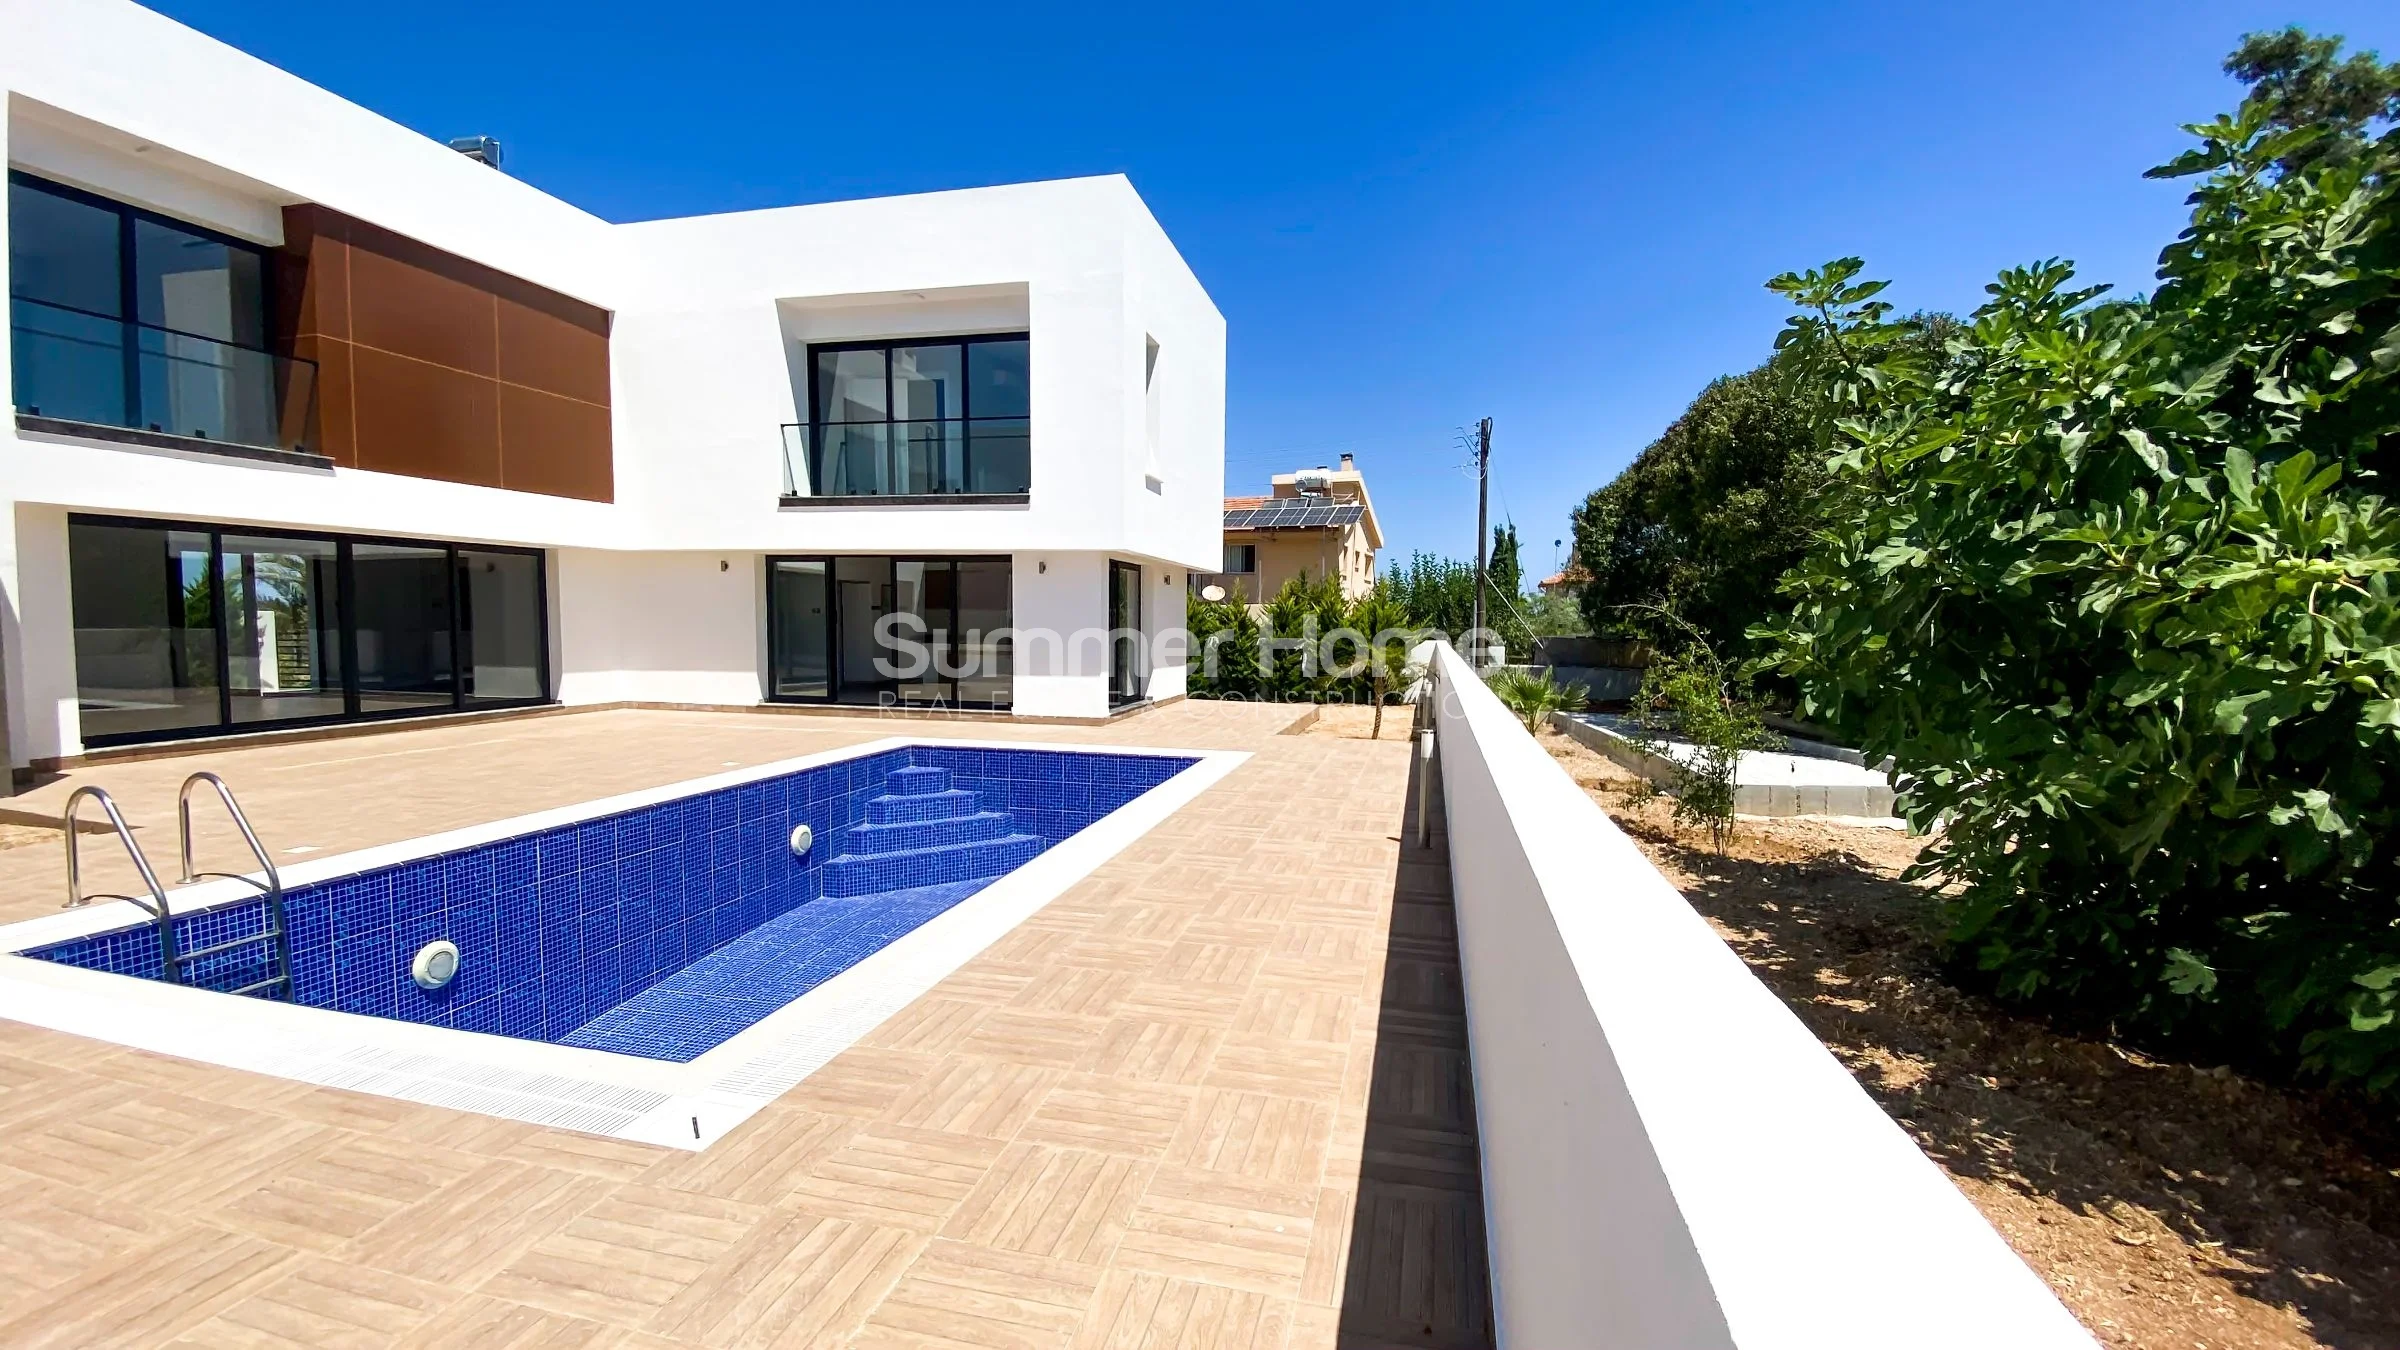 Recently completed well-located villas in Kyrenia, Cyprus Facilities - 23